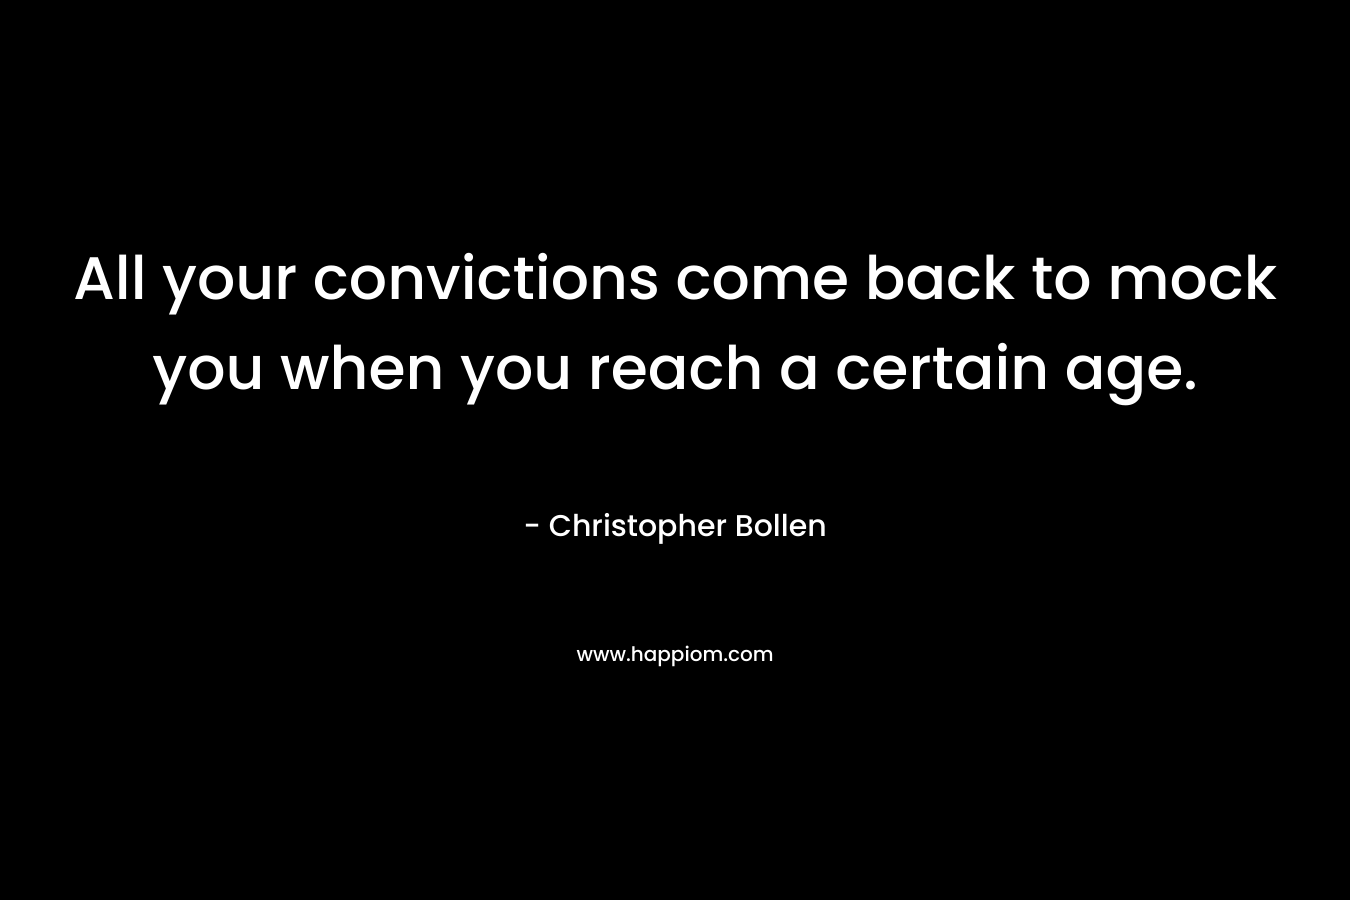 All your convictions come back to mock you when you reach a certain age. – Christopher Bollen